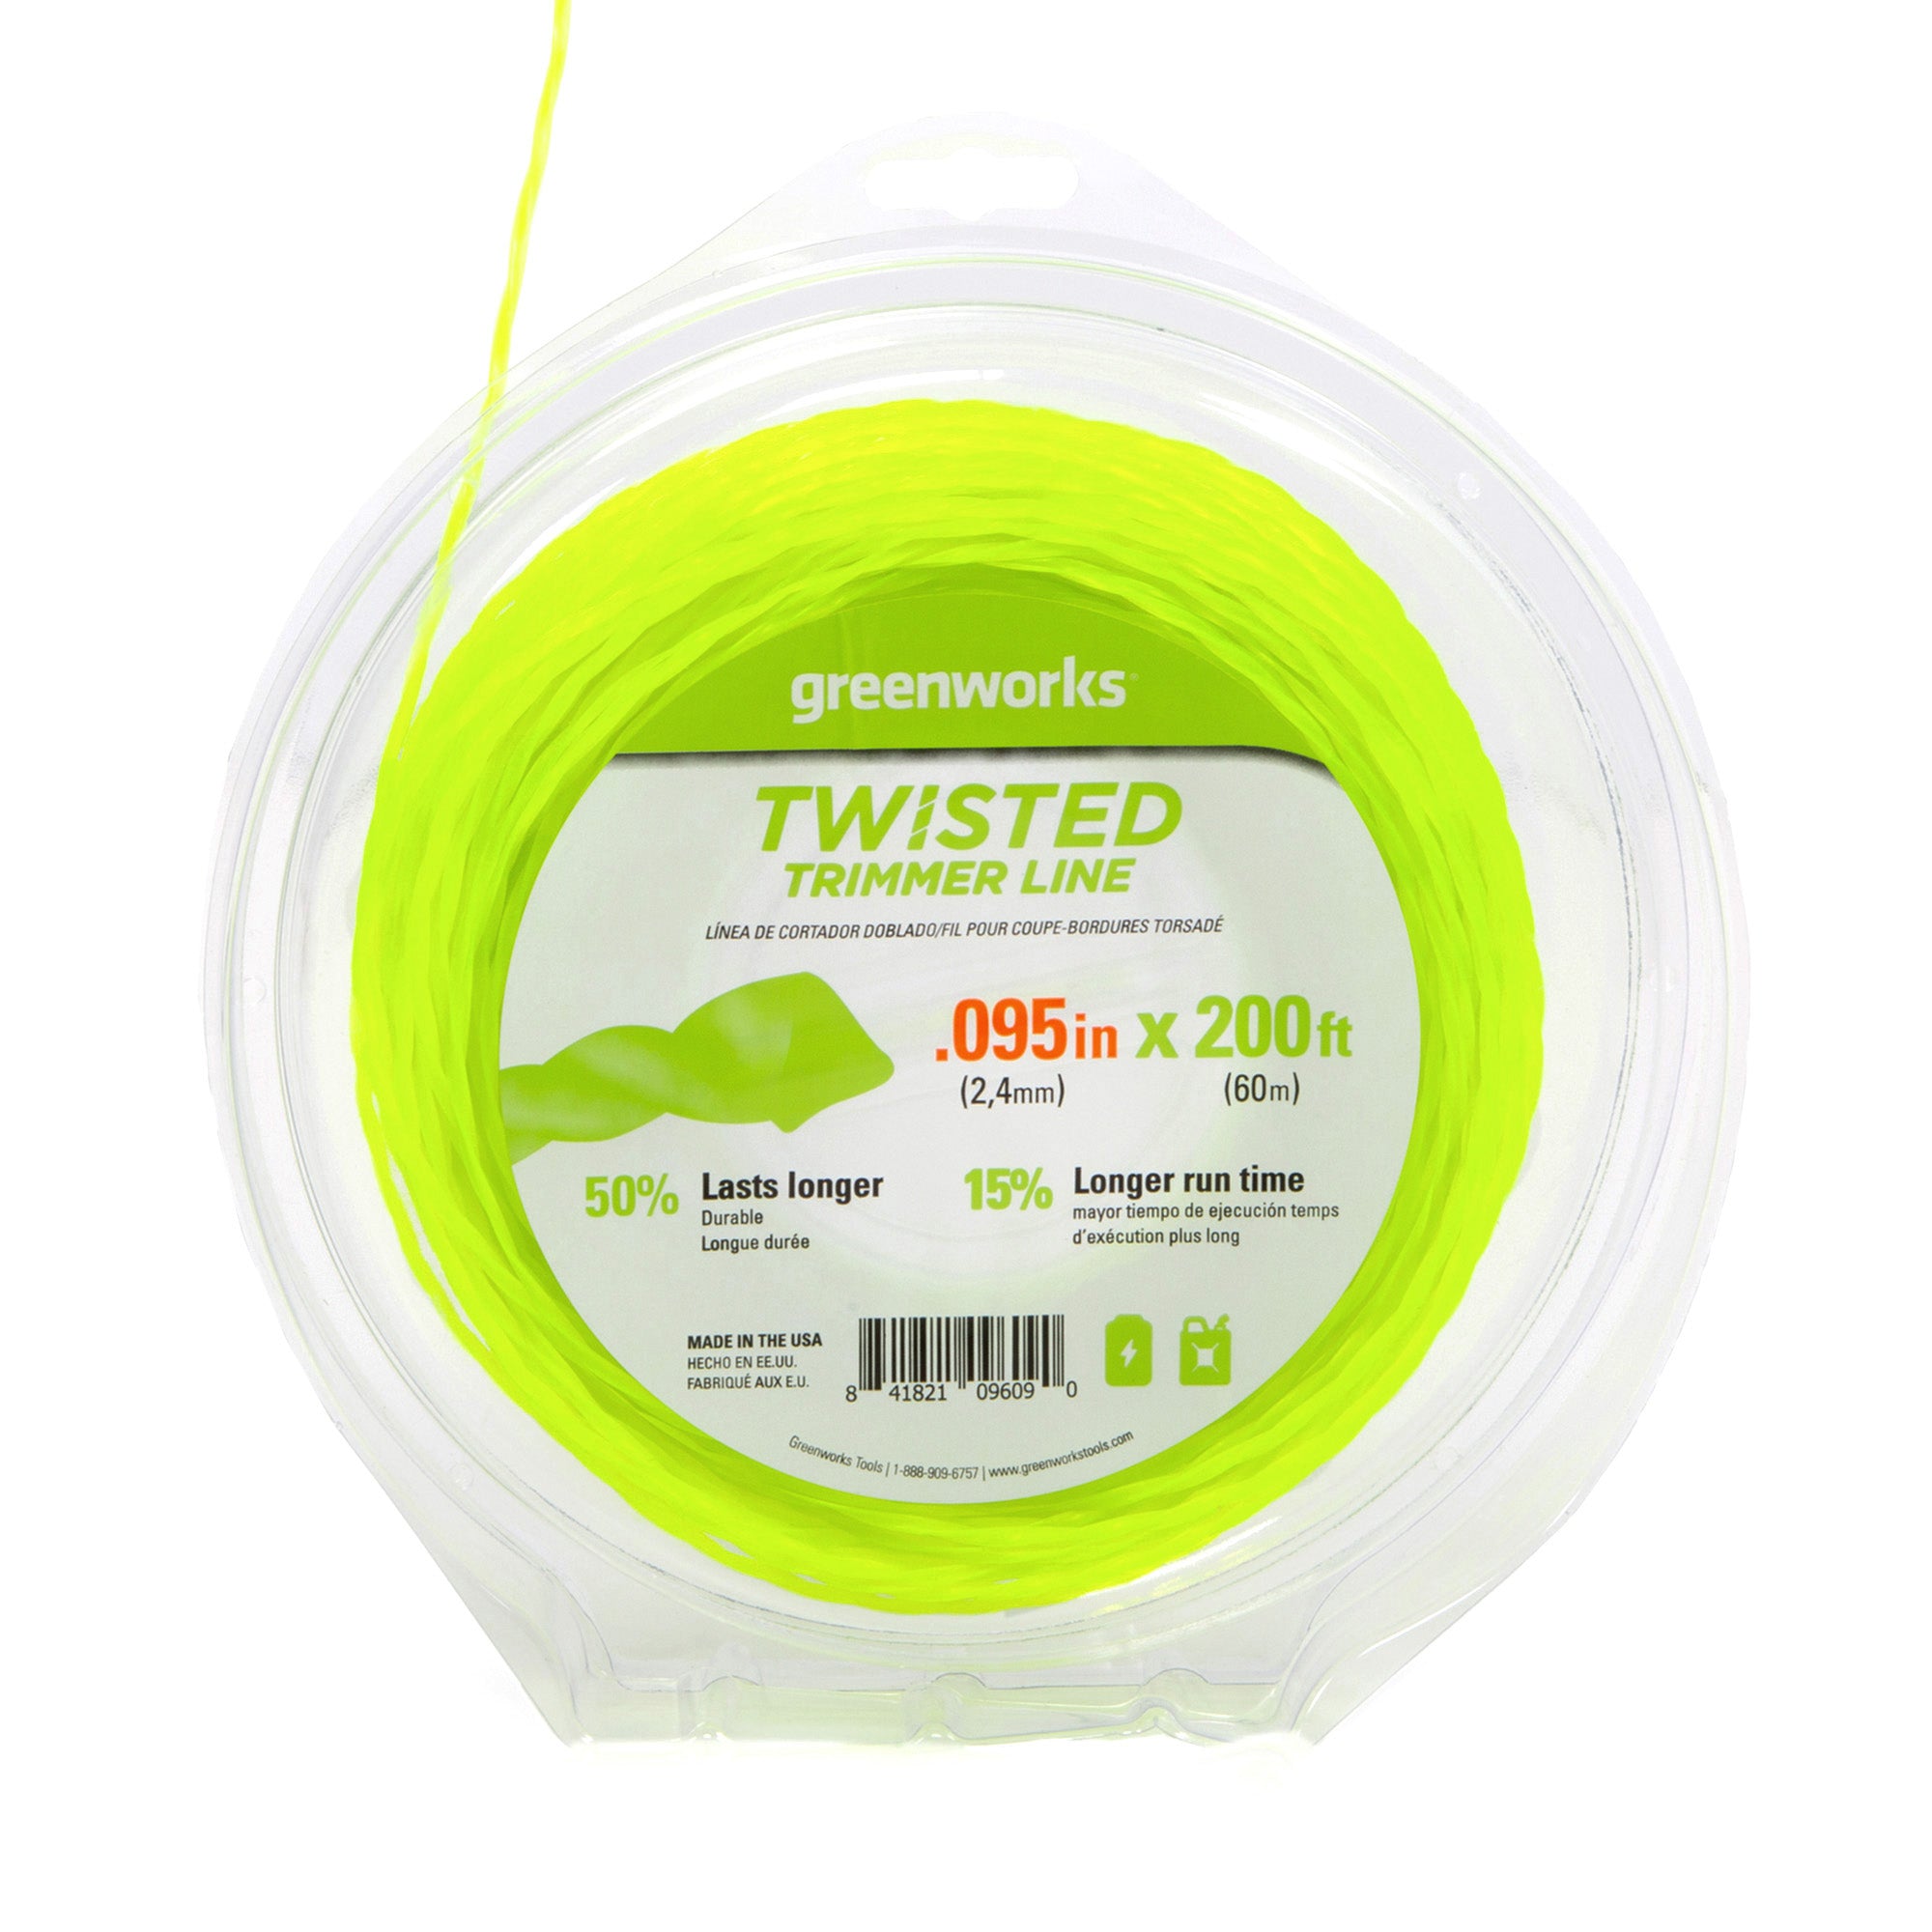 0.095" Ultra Twisted String Trimmer Line (200-Feet)